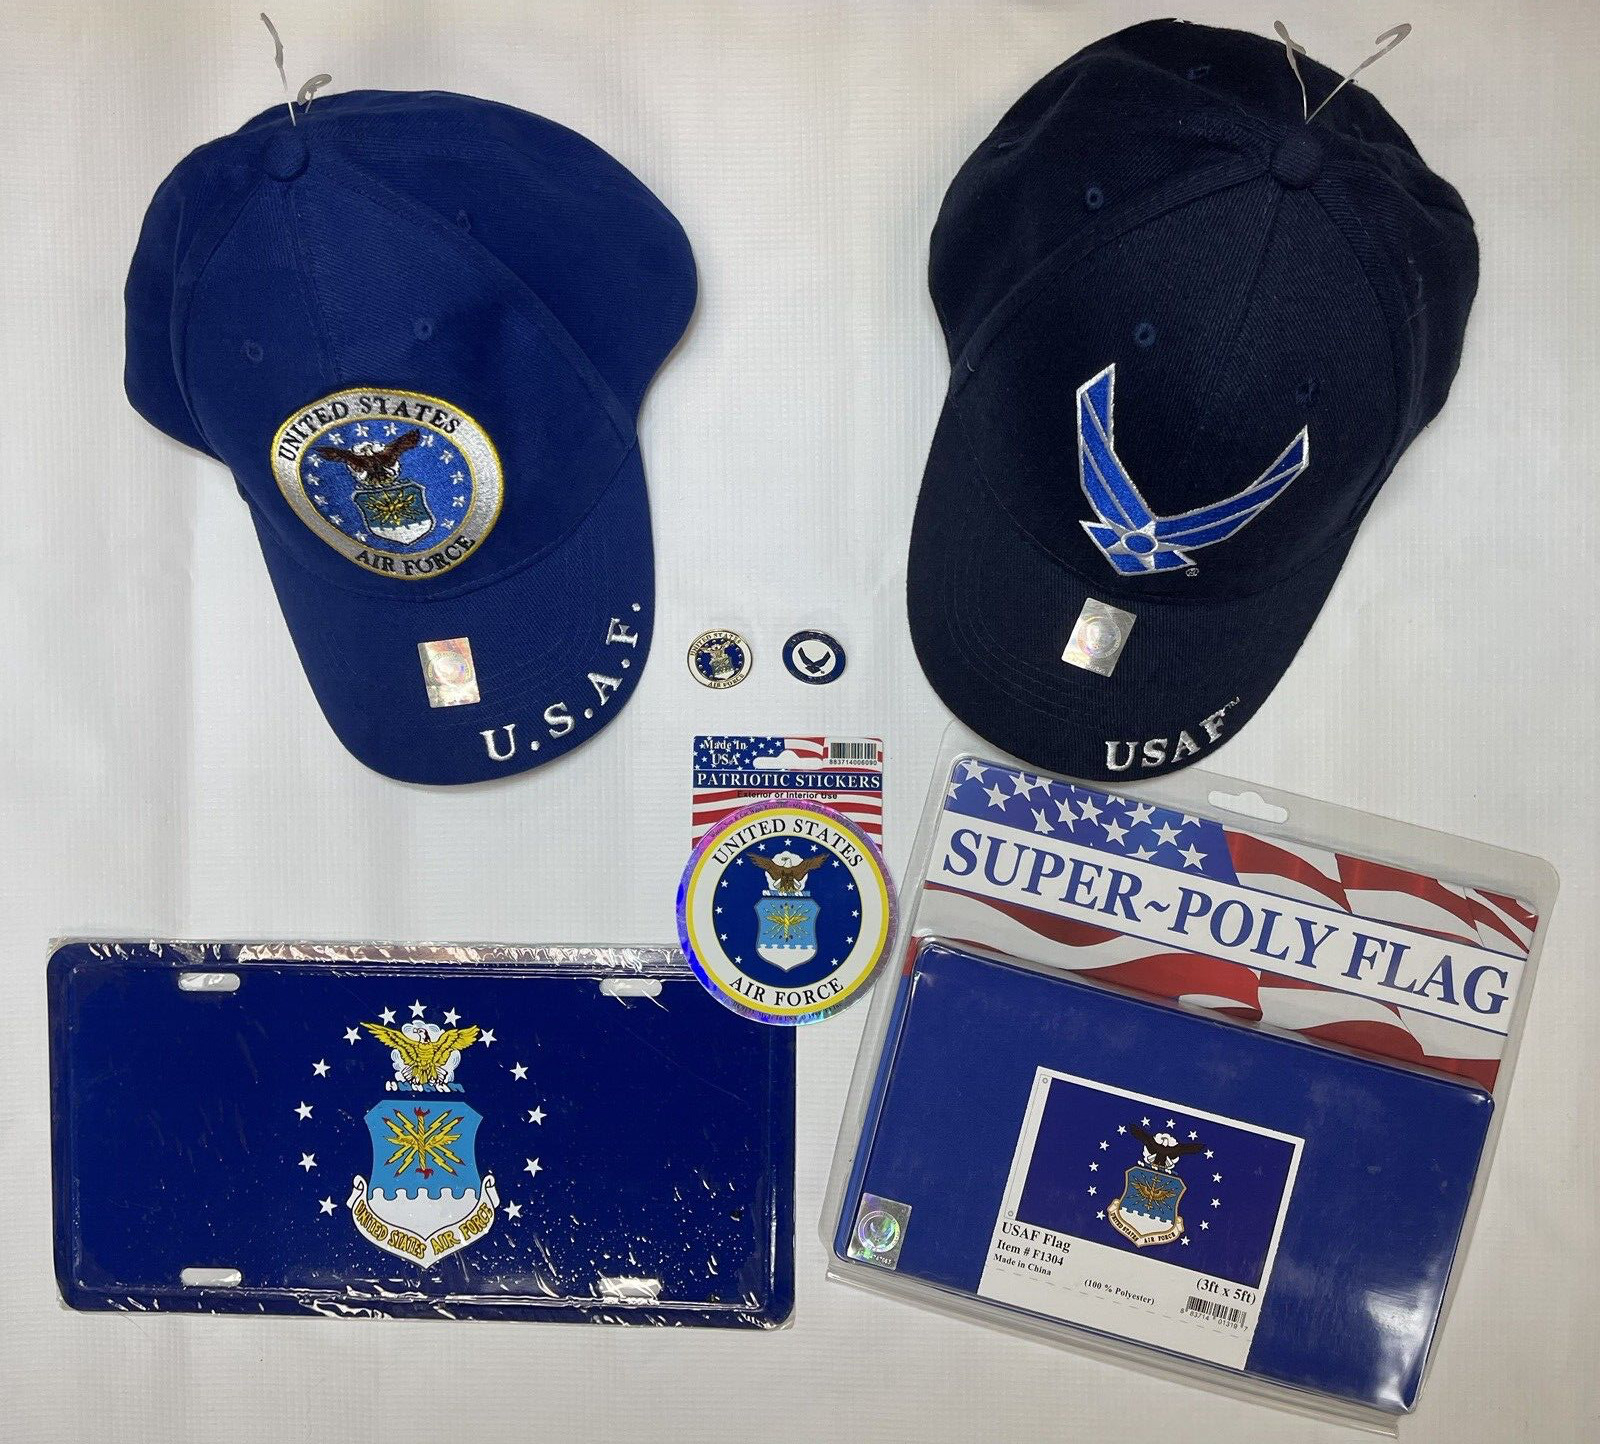 US AIR FORCE 7-PIECE GIFT SET - 2 CAPS, DECAL, 2 PINS, FLAG, LICENSE PLATE | NEW